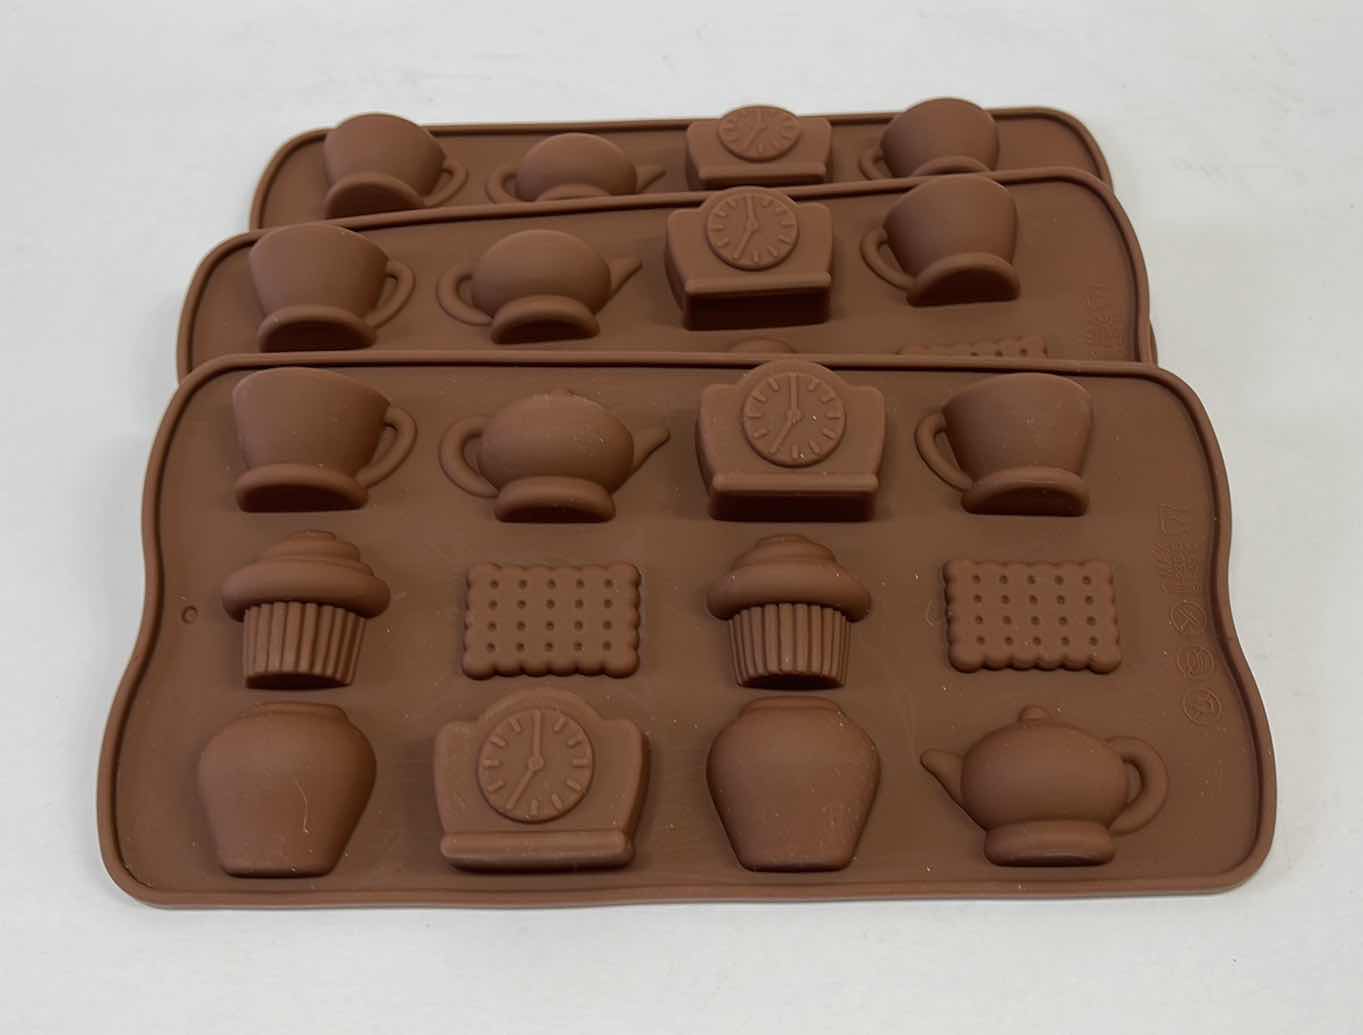 Photo 1 of NEW 3 SILICONE TEA TIME CHOCOLATE / CANDY / ICE MOLDS - TOTAL RETAIL PRICE $22.00